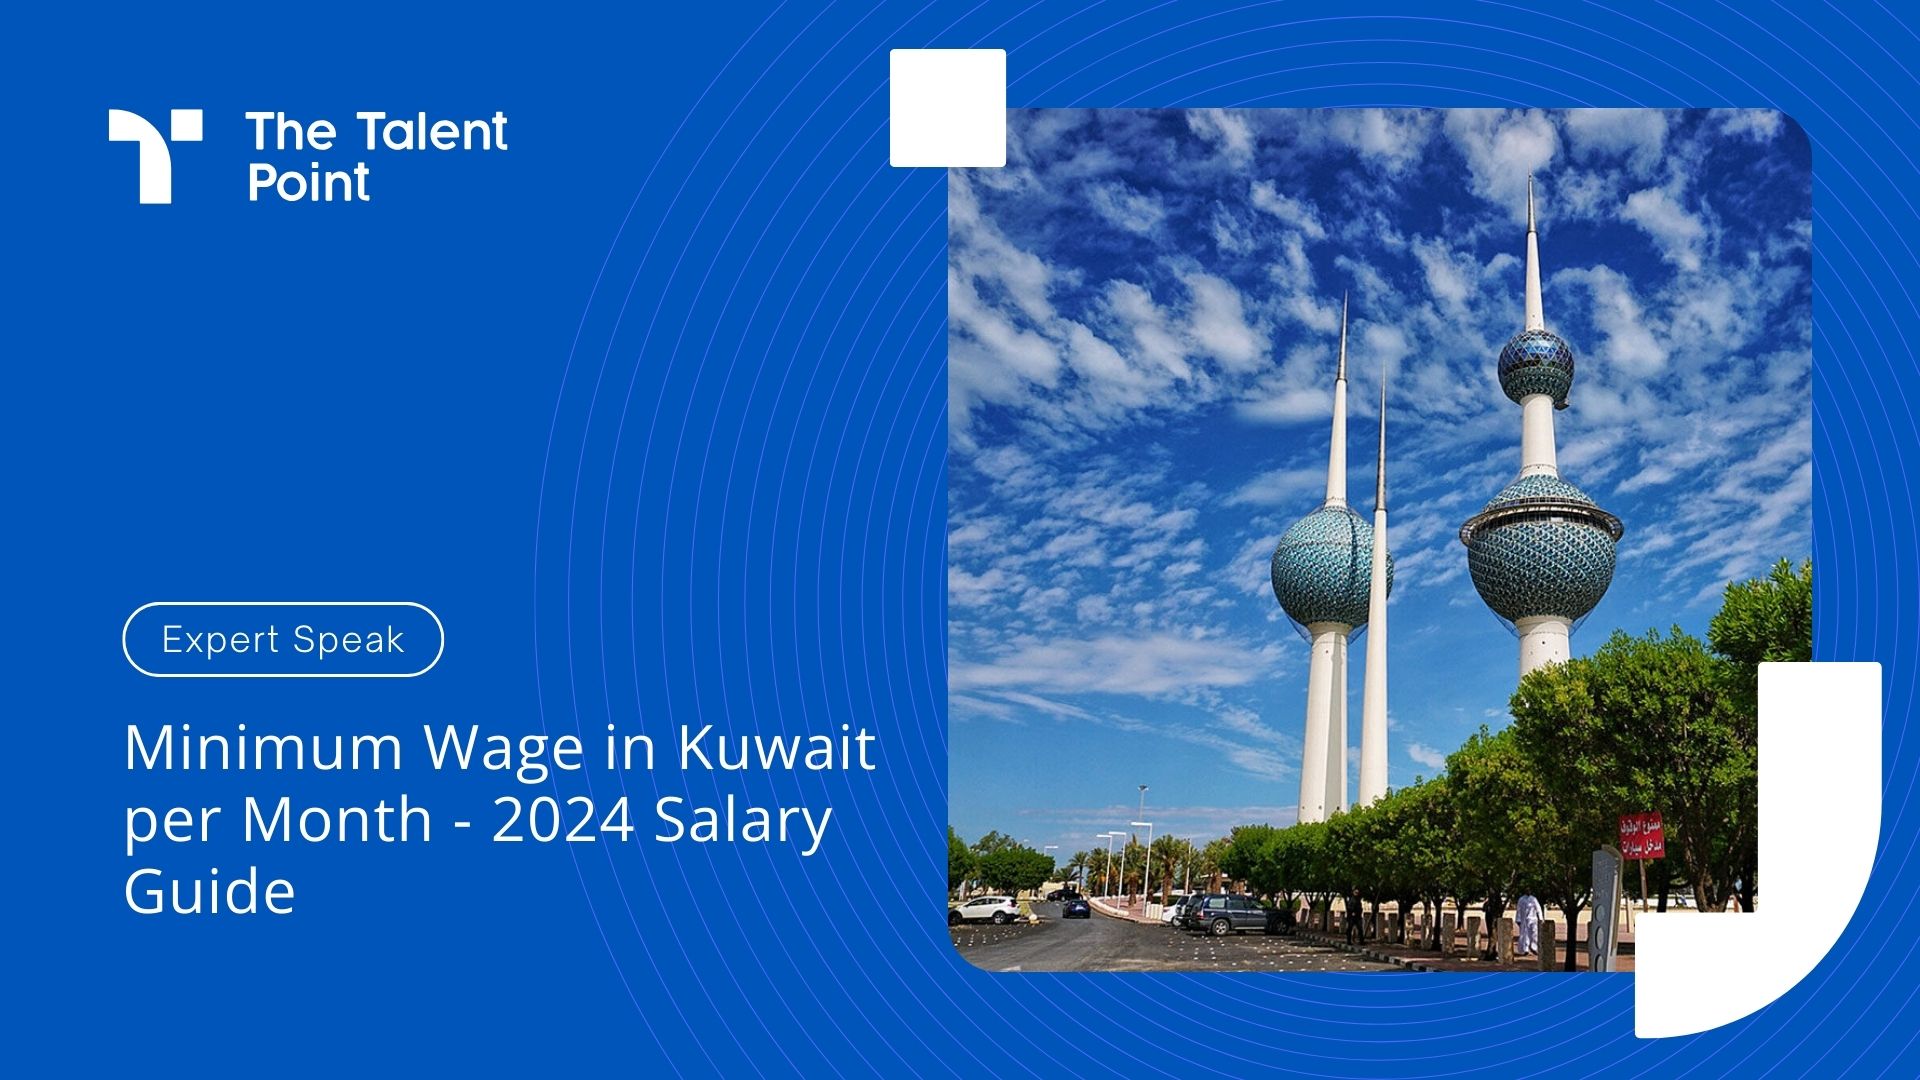 Minimum Wage in Kuwait per Month - 2024 Salary Guide